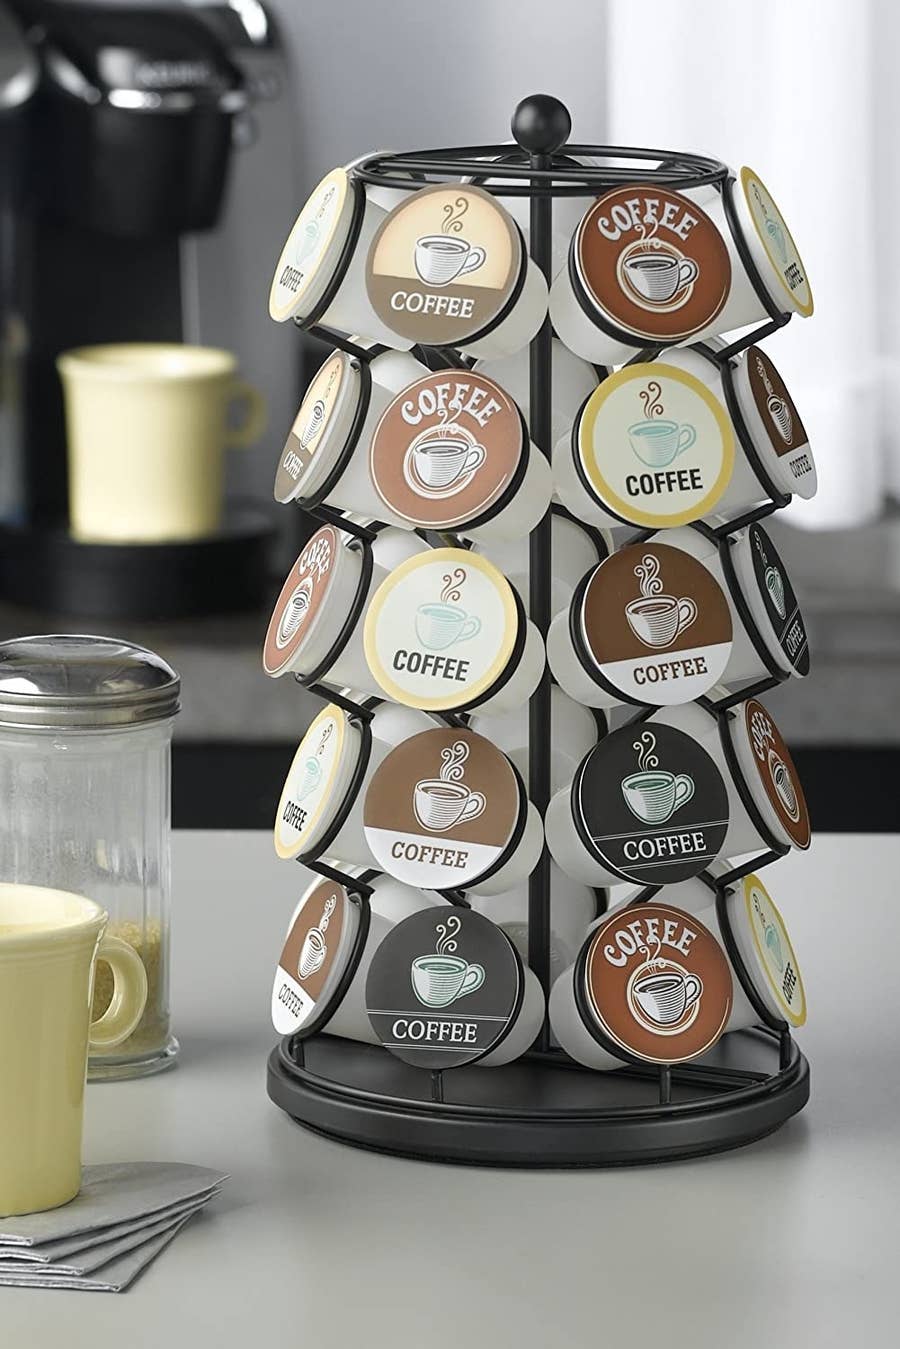 31 Kitchen Products For Coffee Lovers